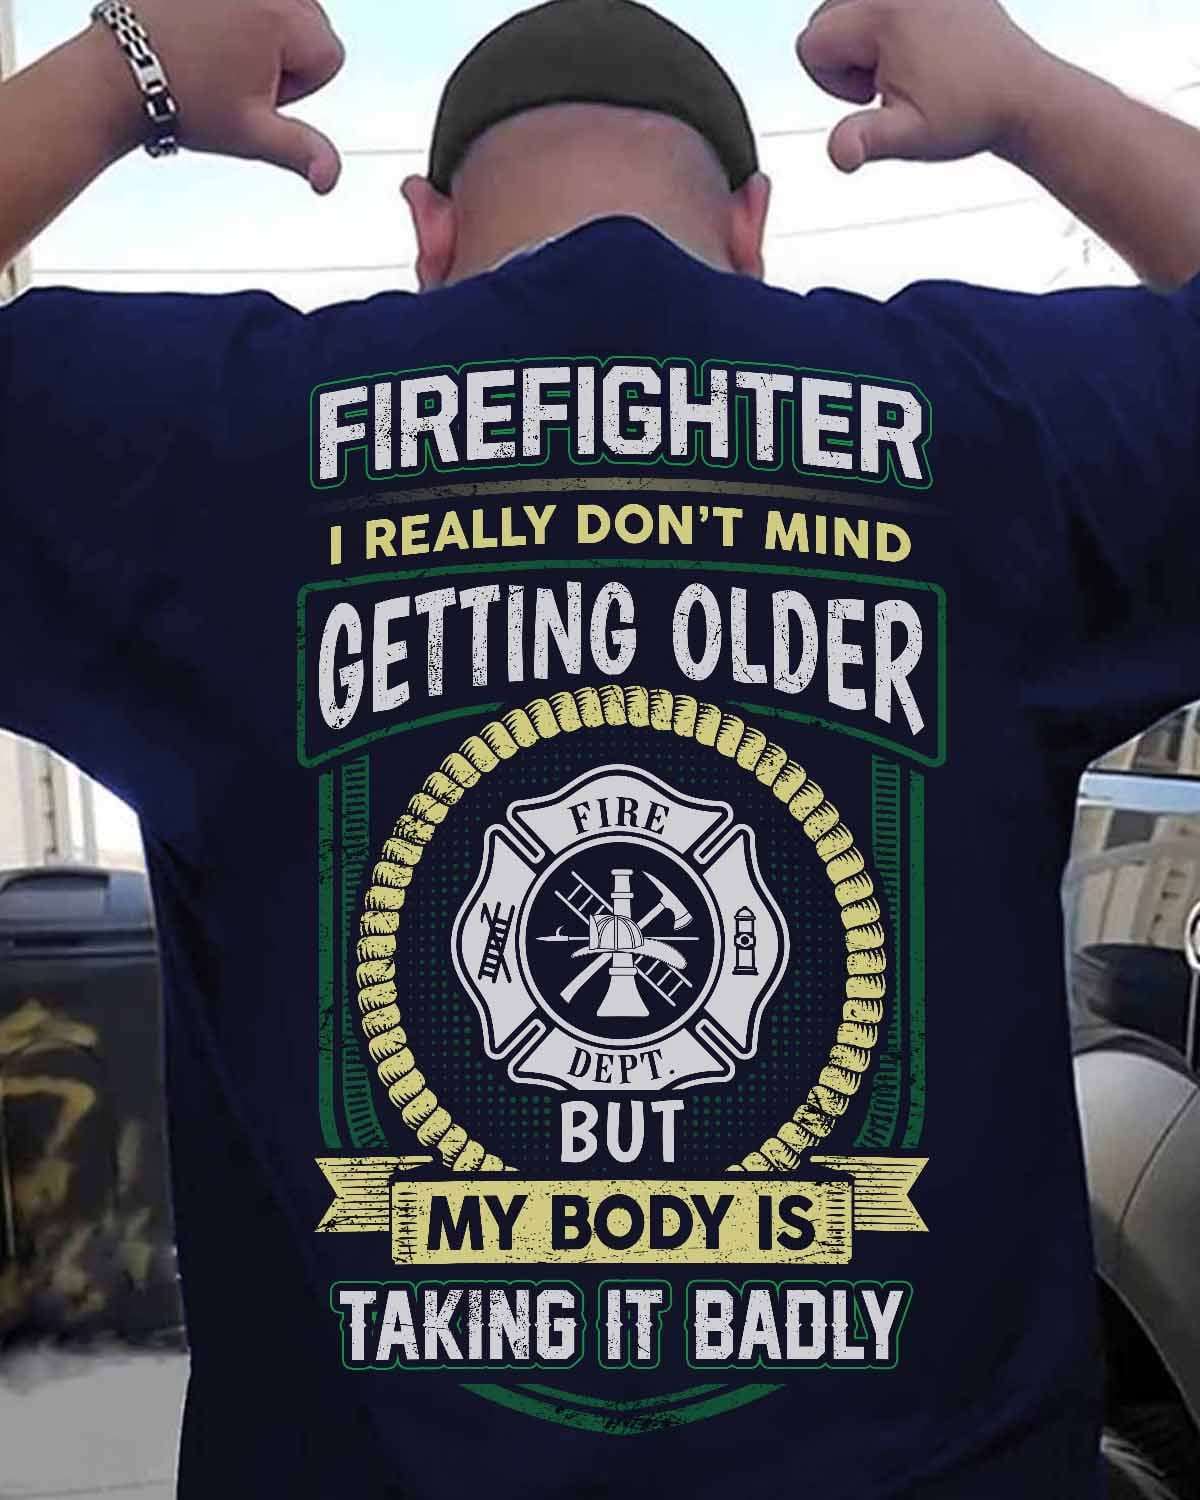 Firefighter I really don't mind getting older but my body is taking it badly - Firefighter the job